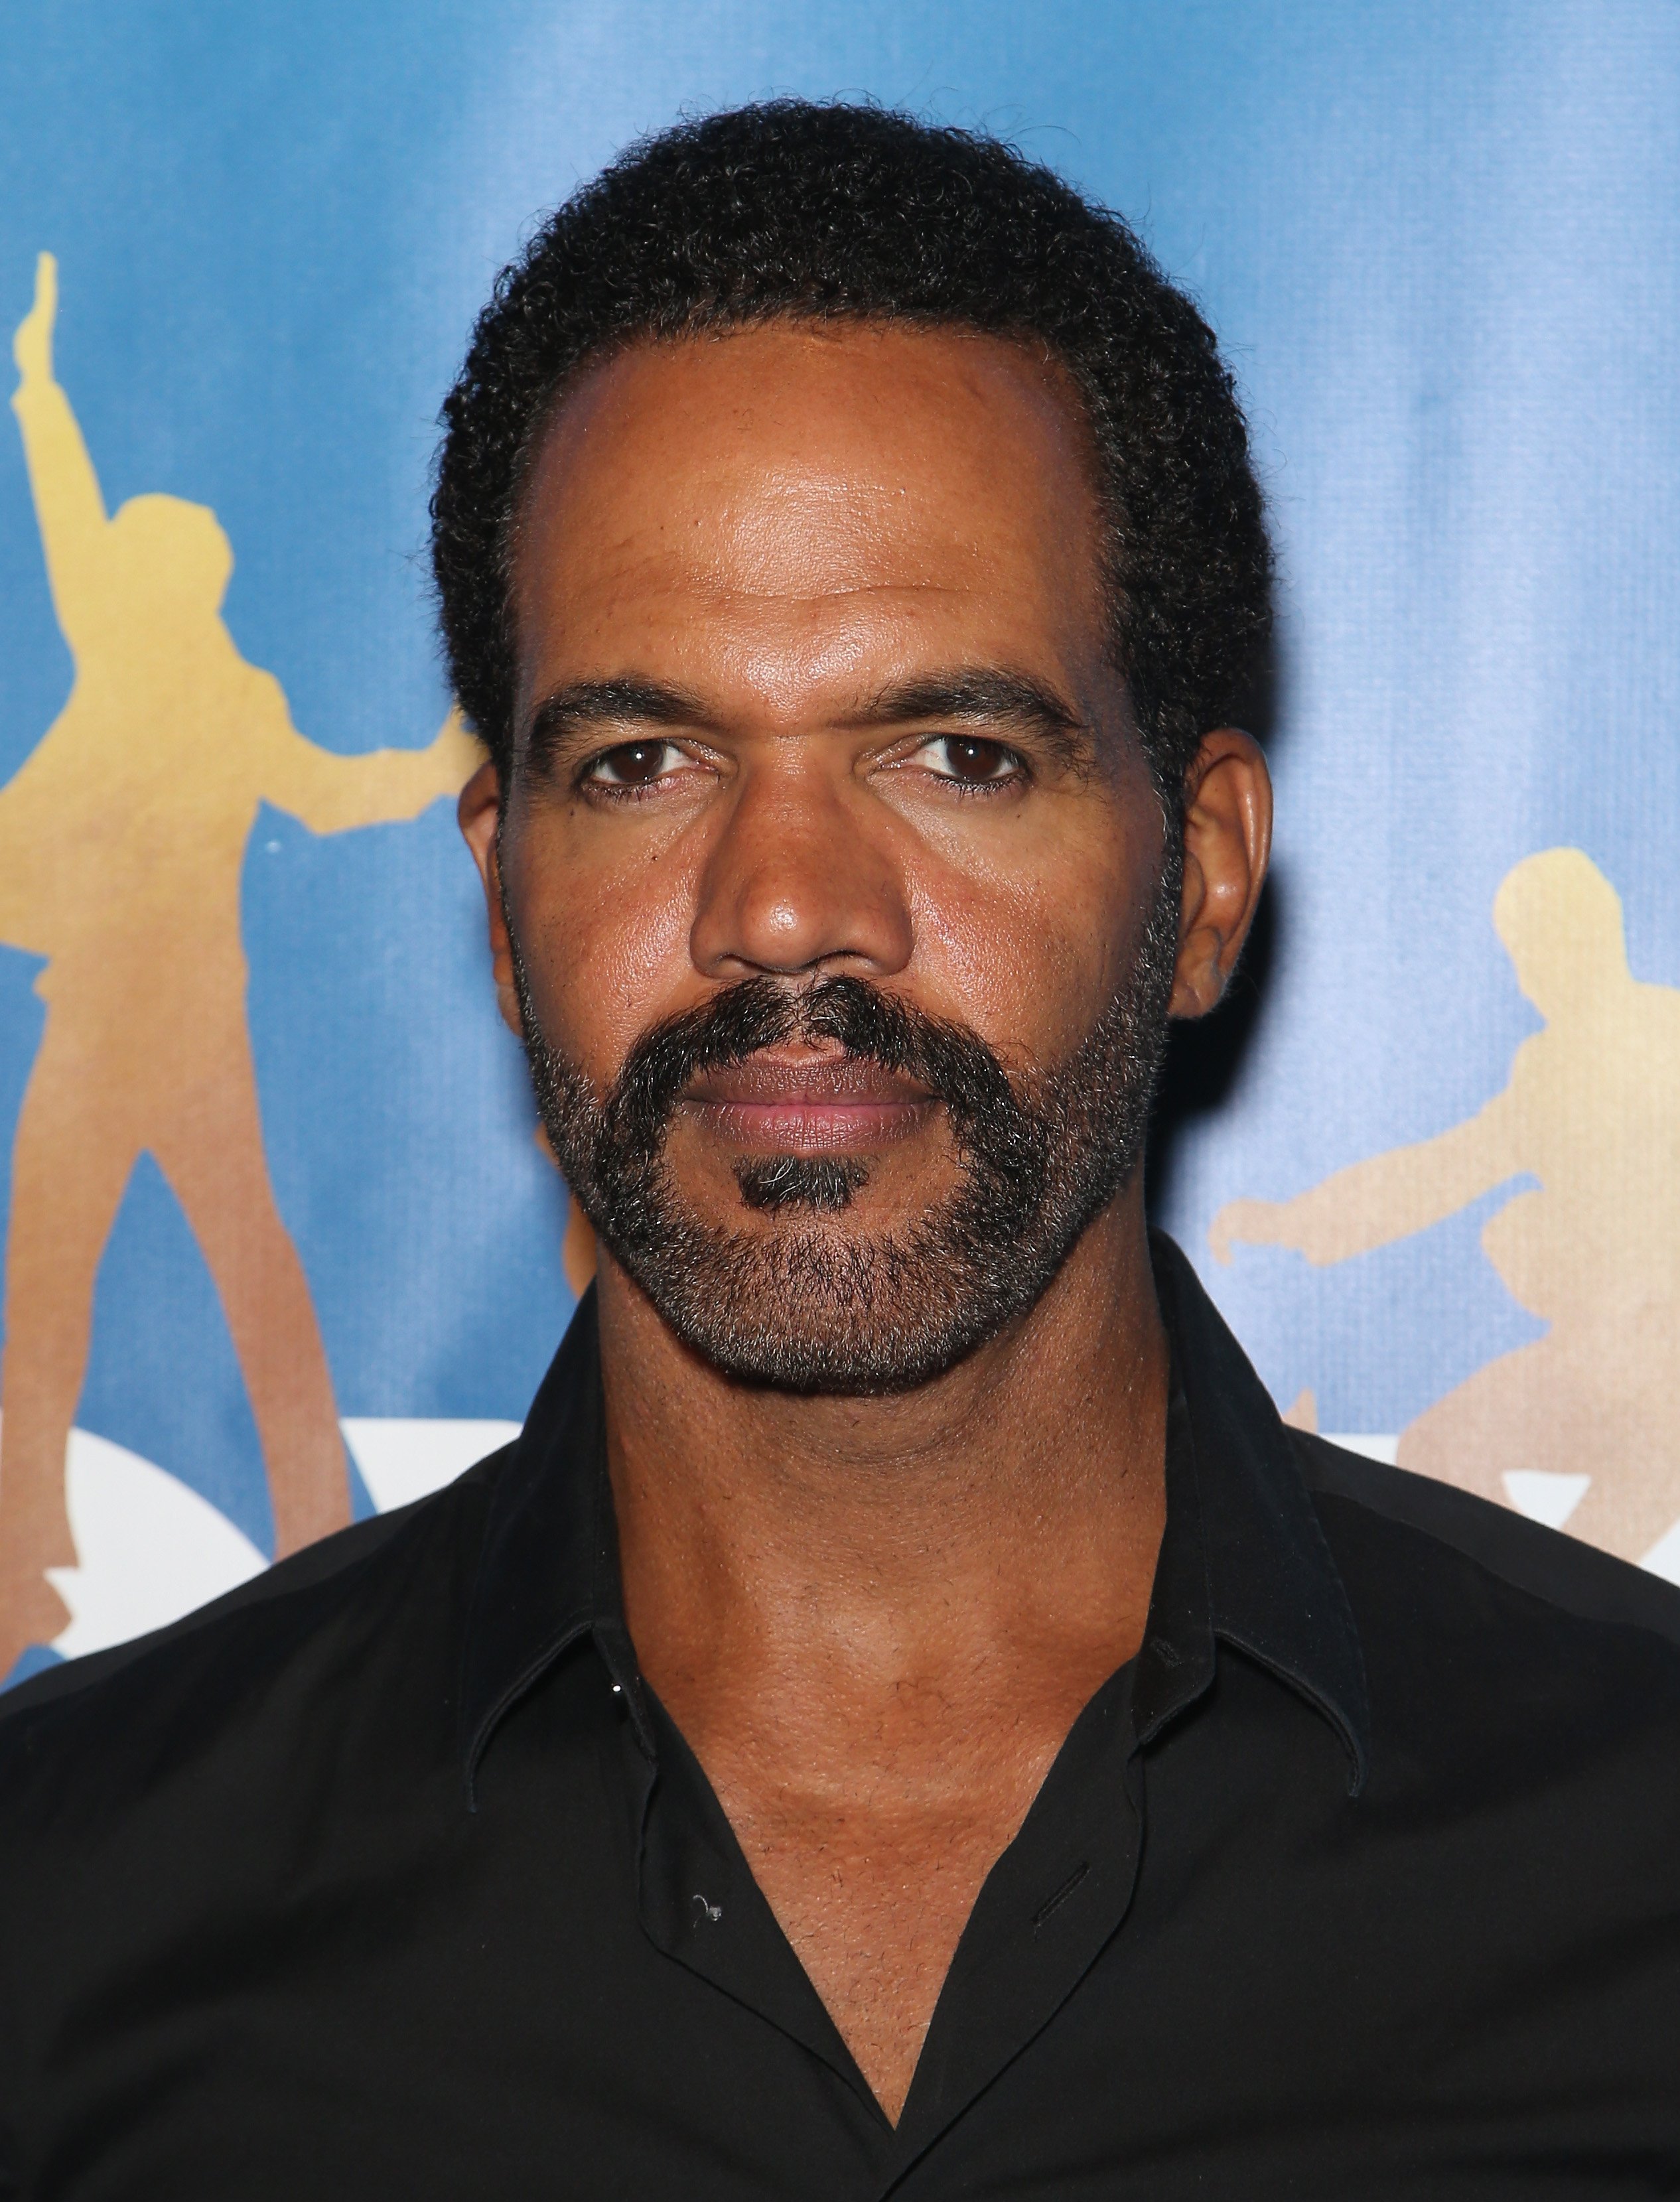 Kristoff St. John at the 10th anniversary celebration of "The Beatles LOVE by Cirque de Soleil" at the  Mirage Hotel & Casino in Las Vegas on July 14, 2016. | Source: Getty Images 